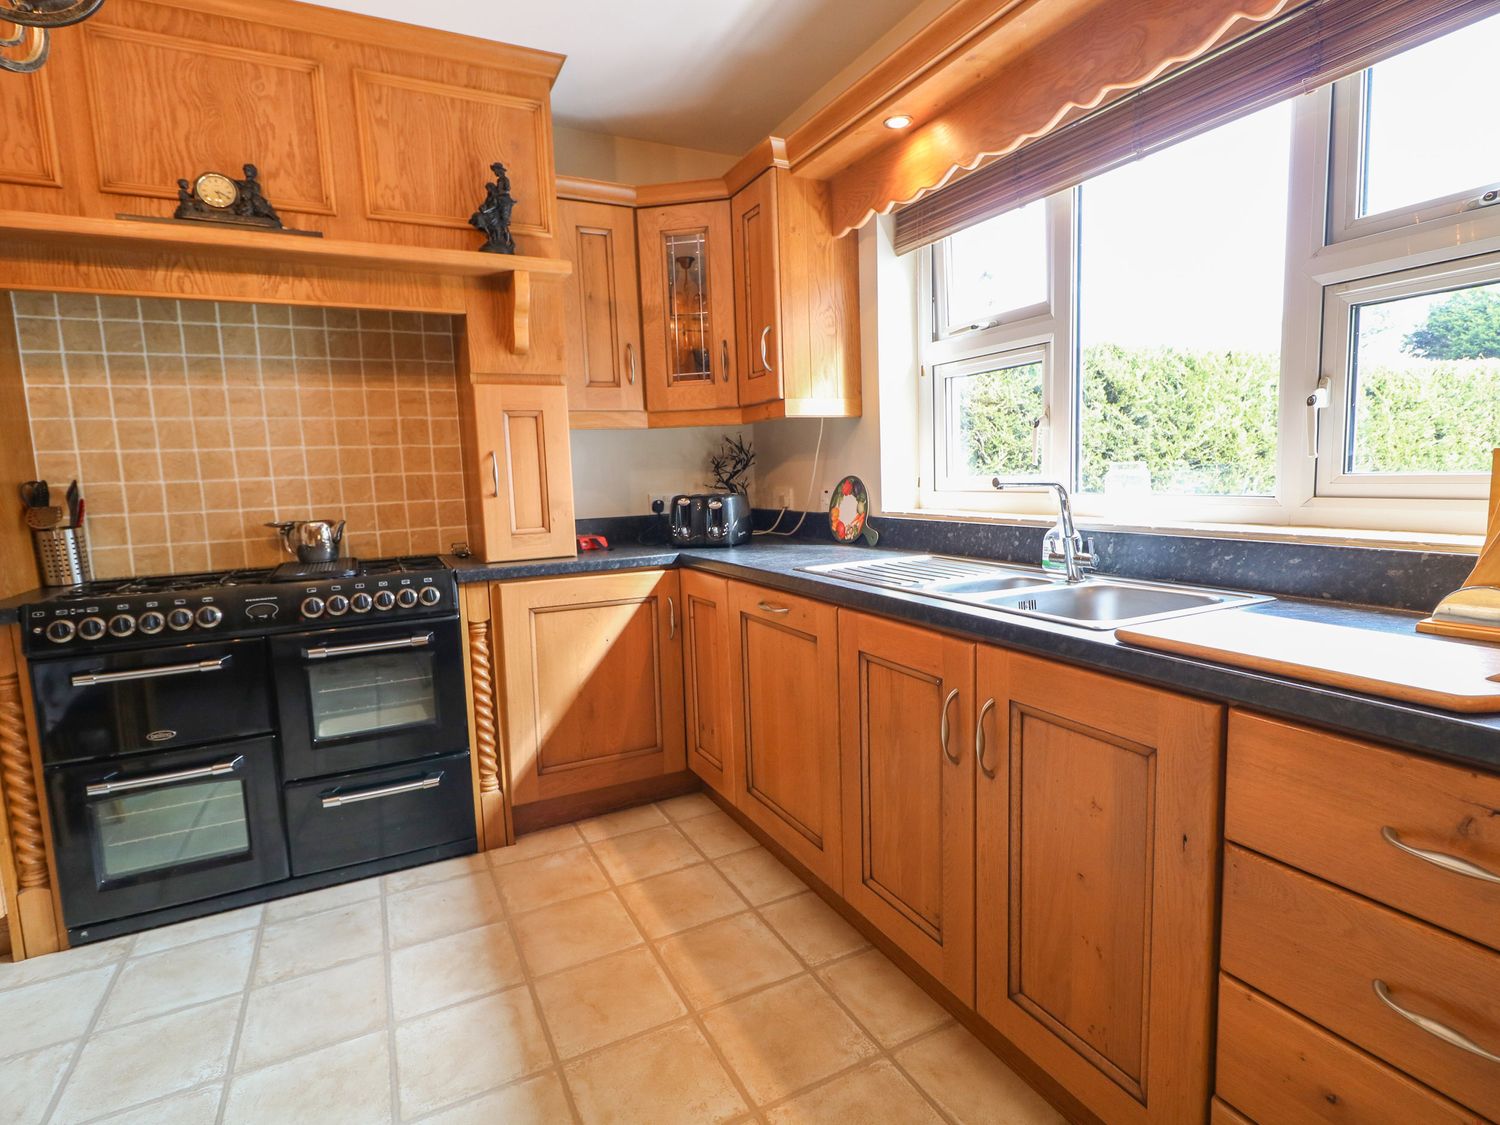 Lough Neagh Cottage, Moneymore